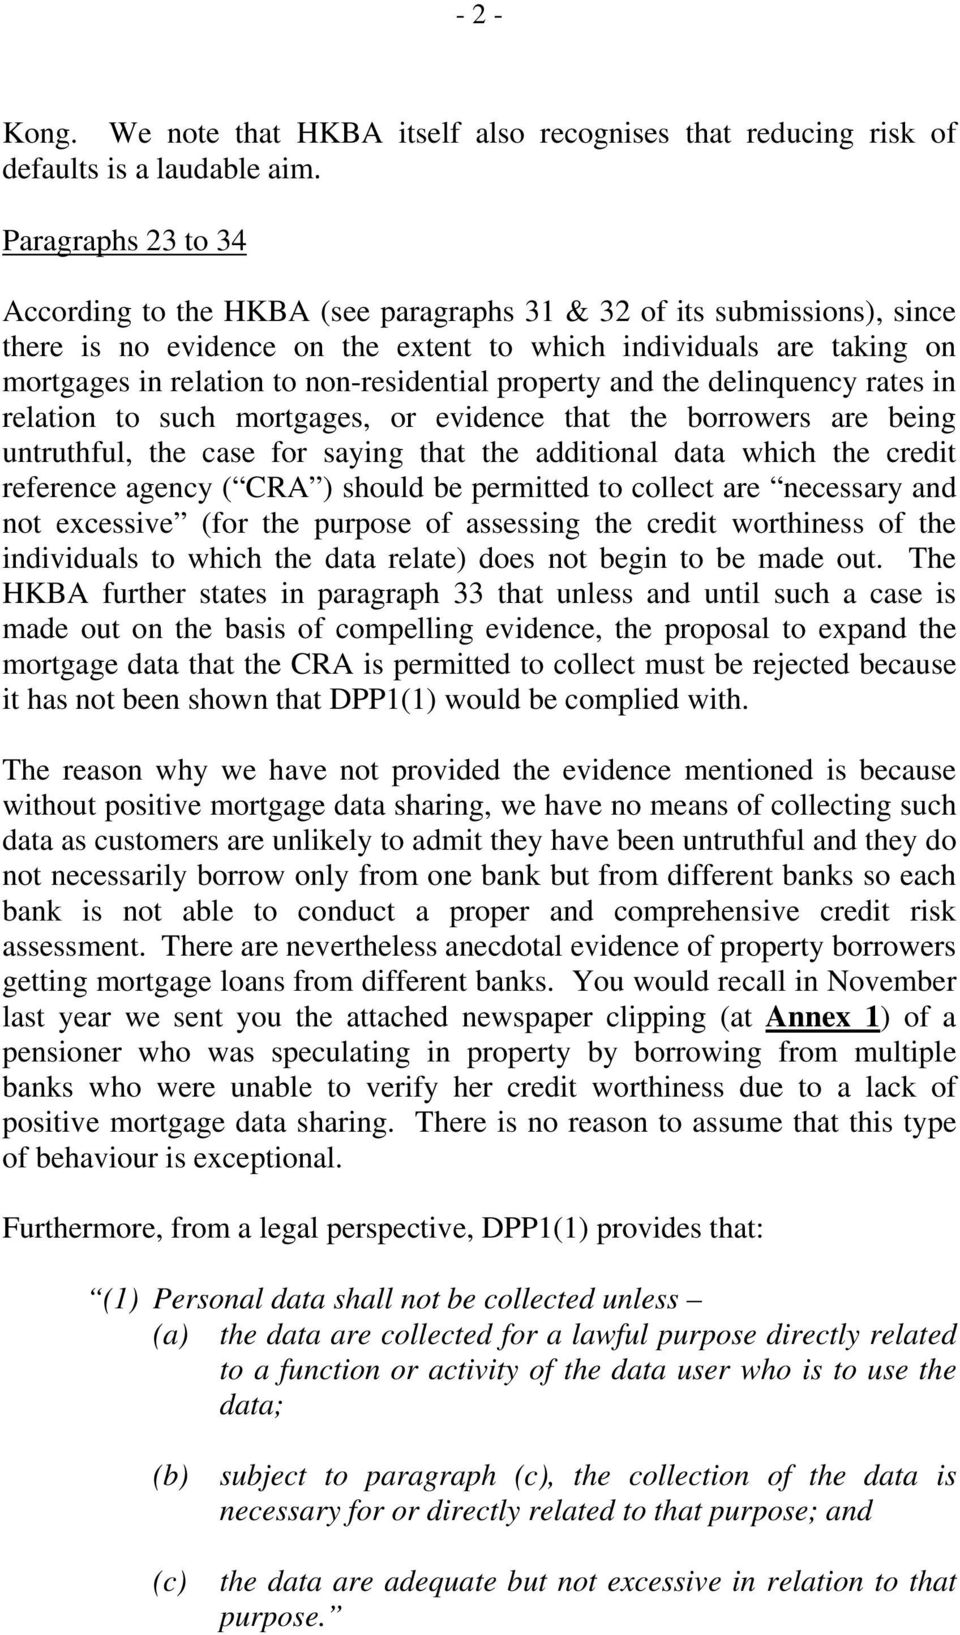 non-residential property and the delinquency rates in relation to such mortgages, or evidence that the borrowers are being untruthful, the case for saying that the additional data which the credit